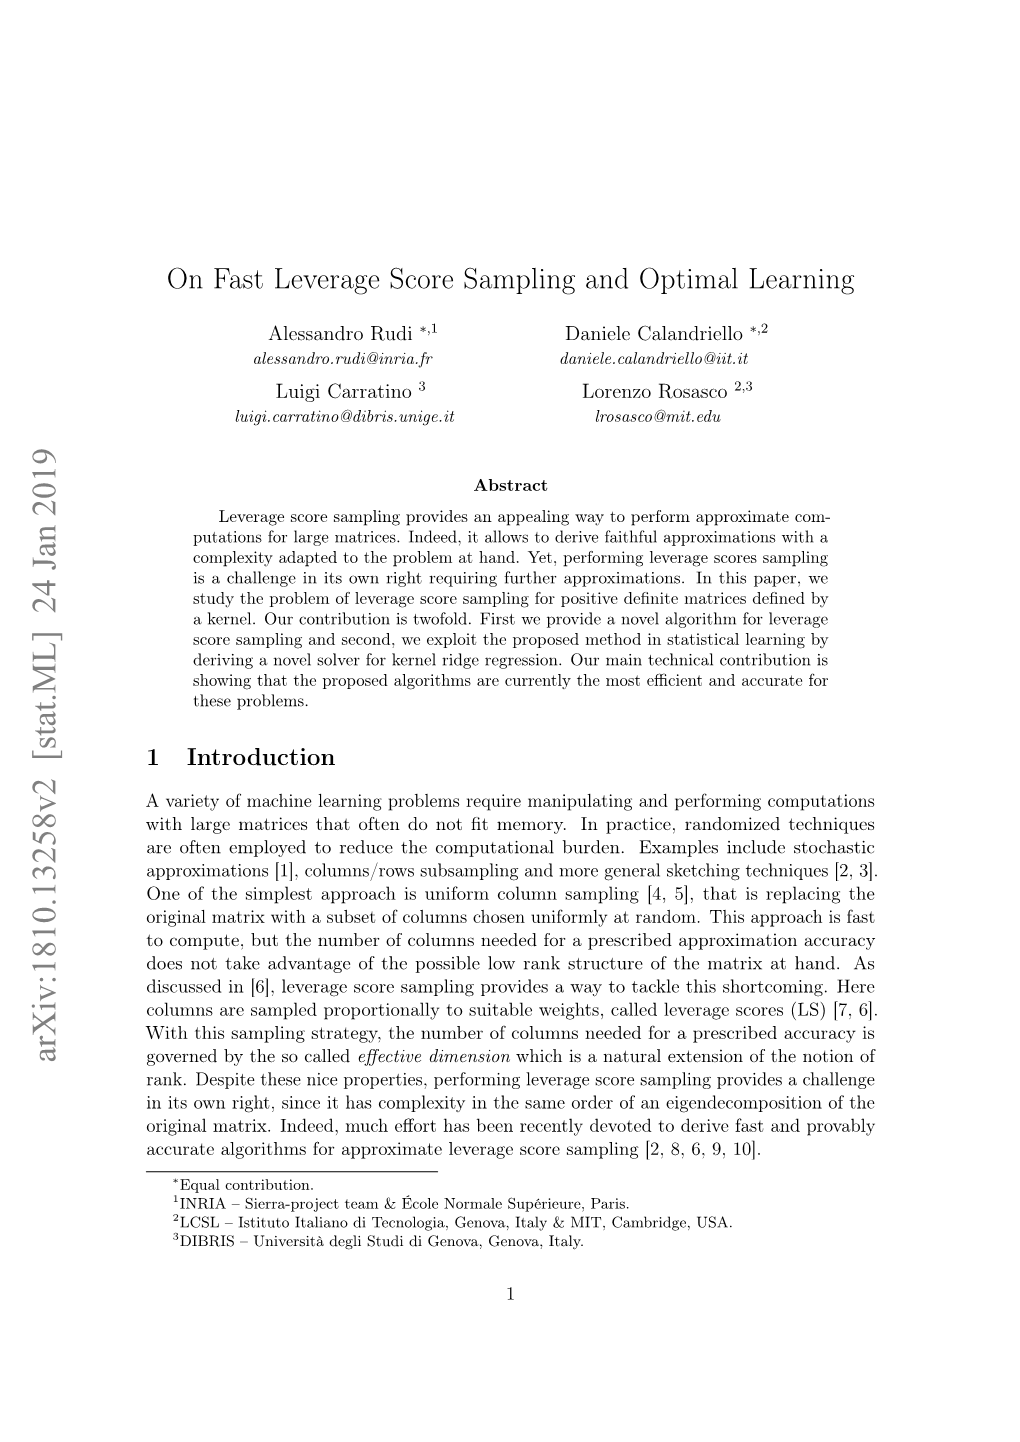 On Fast Leverage Score Sampling and Optimal Learning